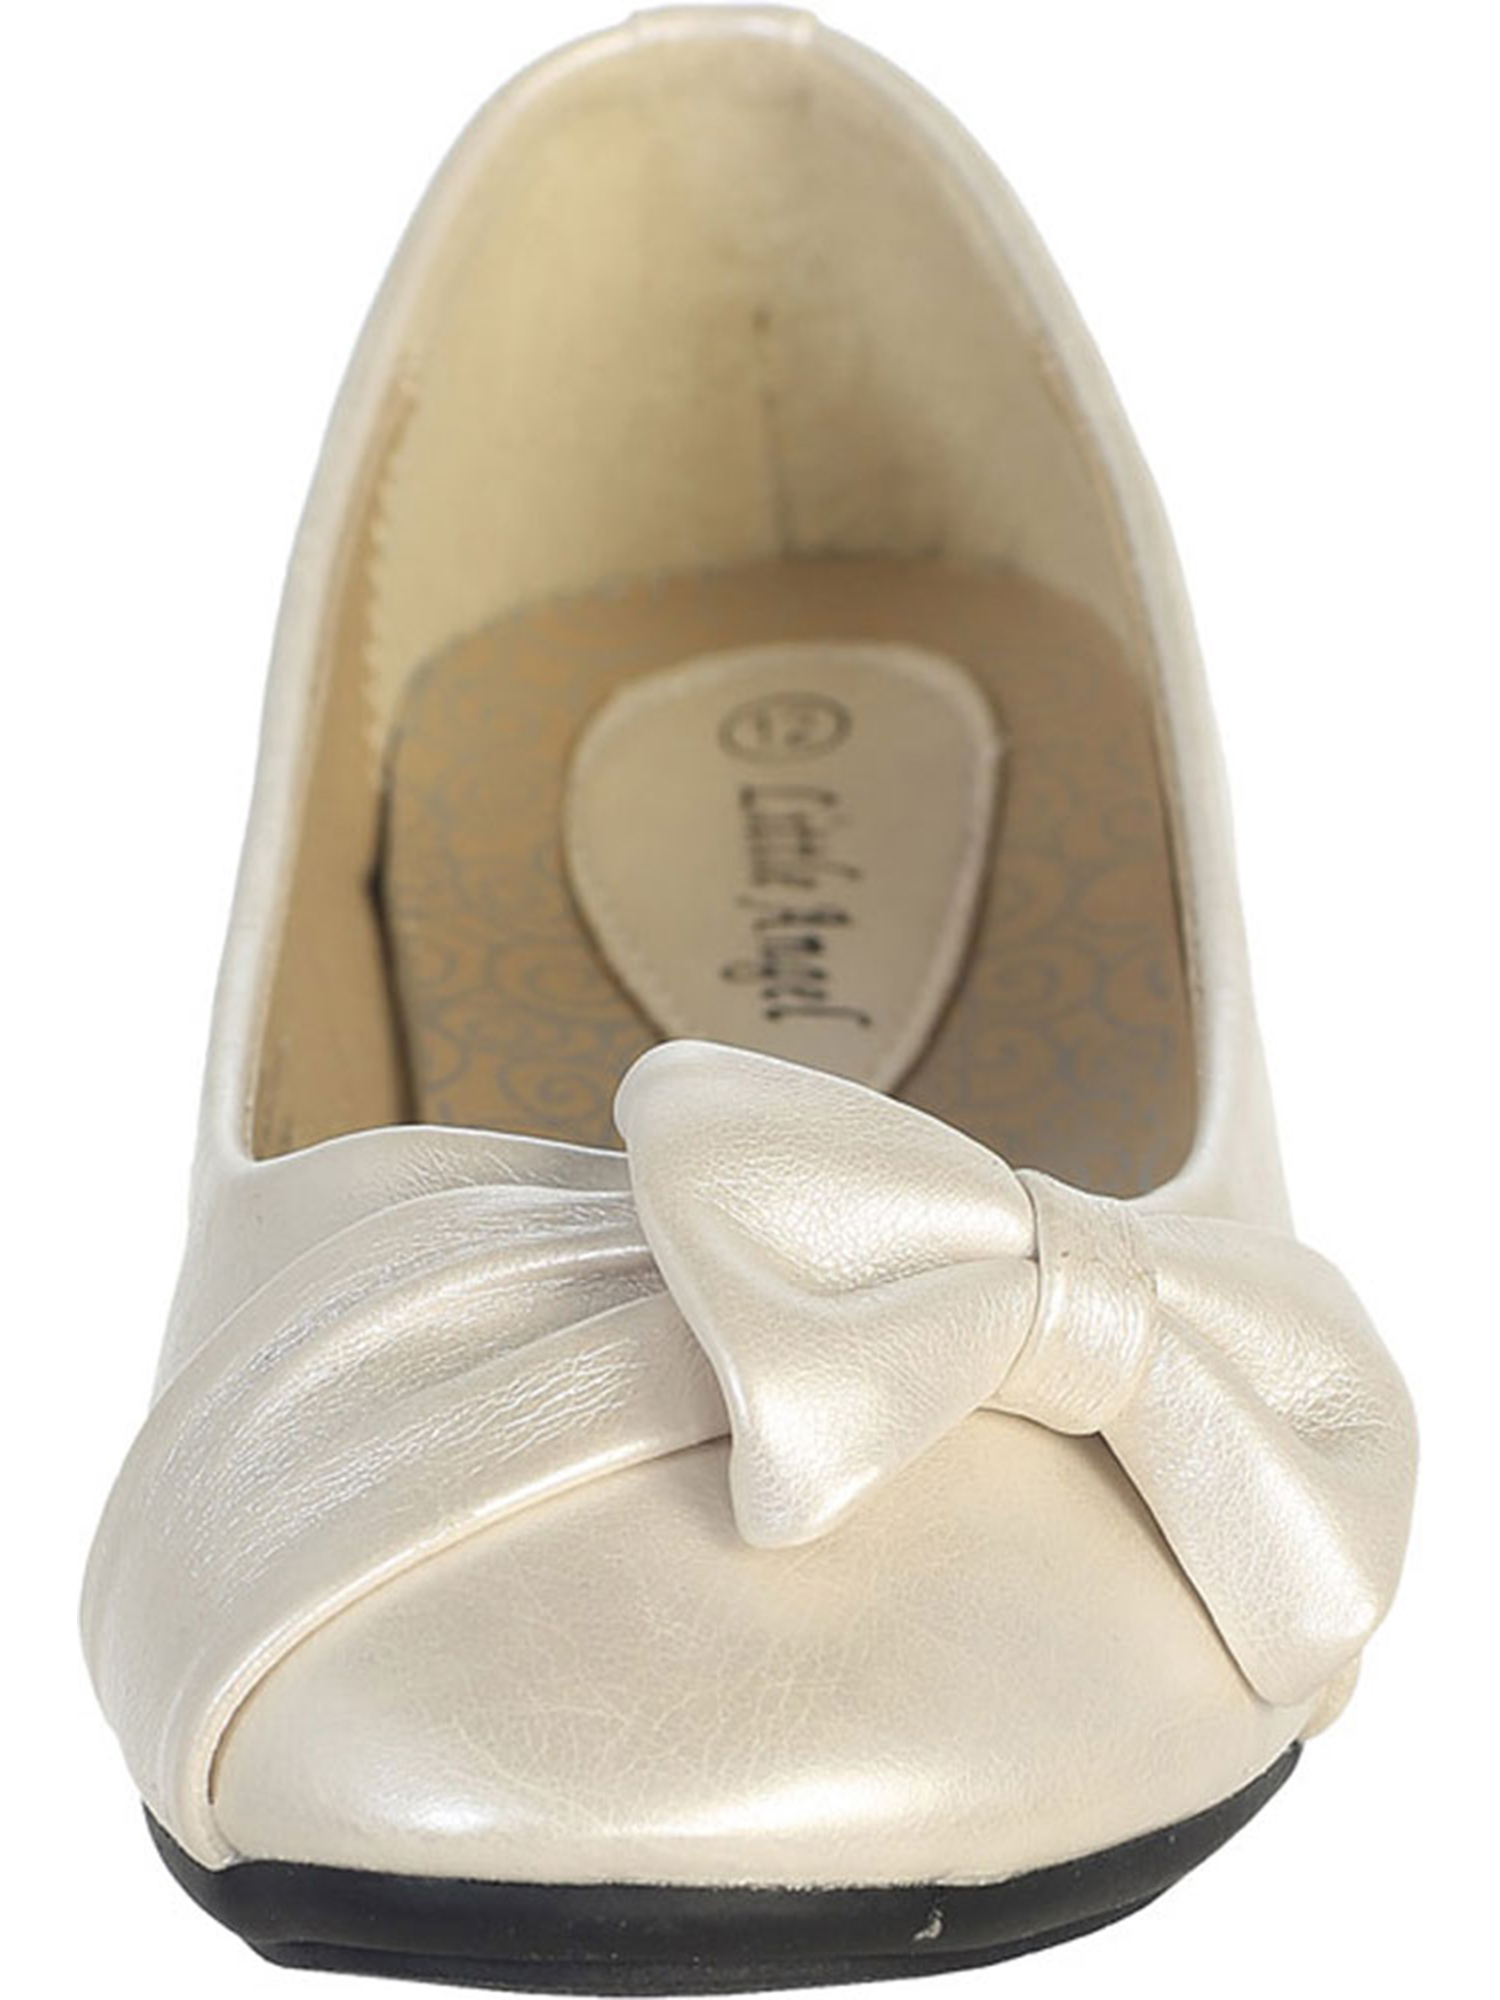 Ivory Pearl Girl's Flat Shoes with Side Bow Infant 6